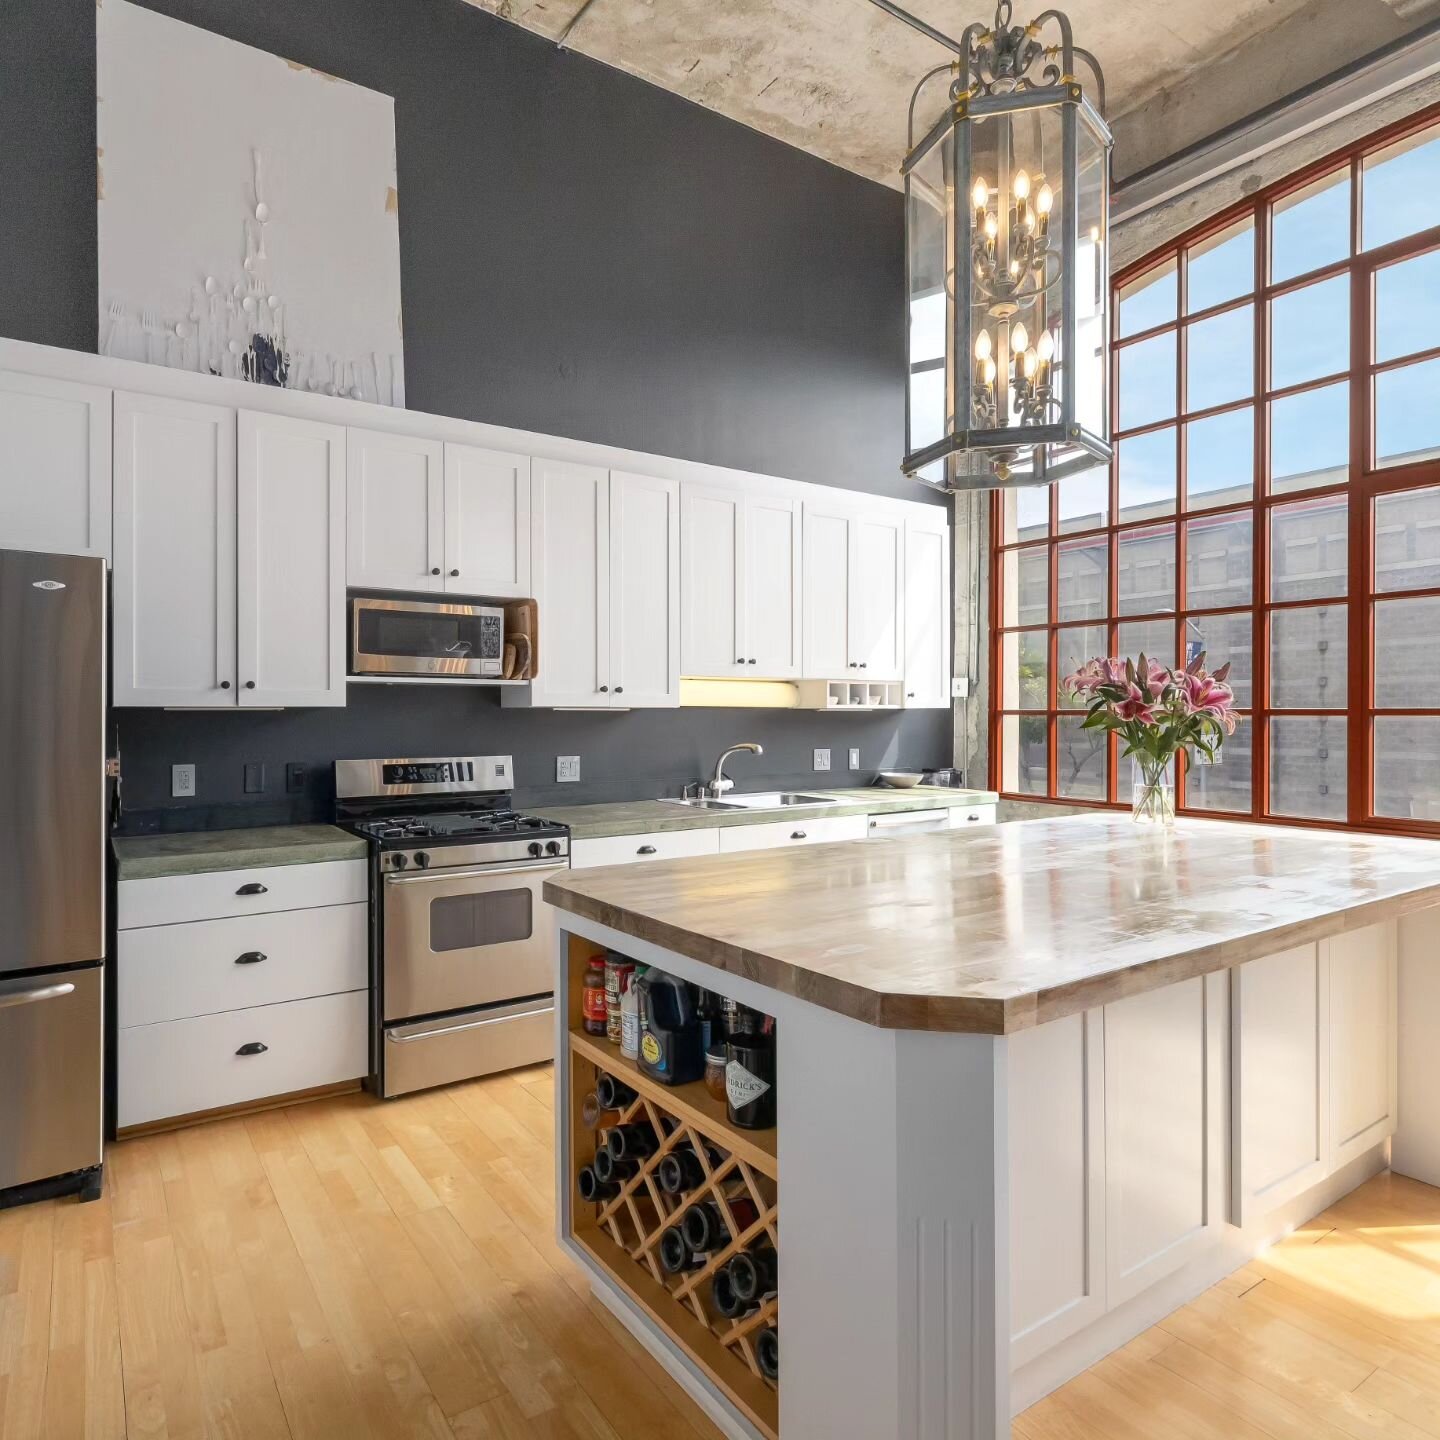 The kitchen is the heart of the home. Many homes are sold on the kitchen alone.

In real estate, your visuals are the heart of marketing. Don't settle for run-of-the-mill real estate photography. 

Give your clients what they deserve, professional re